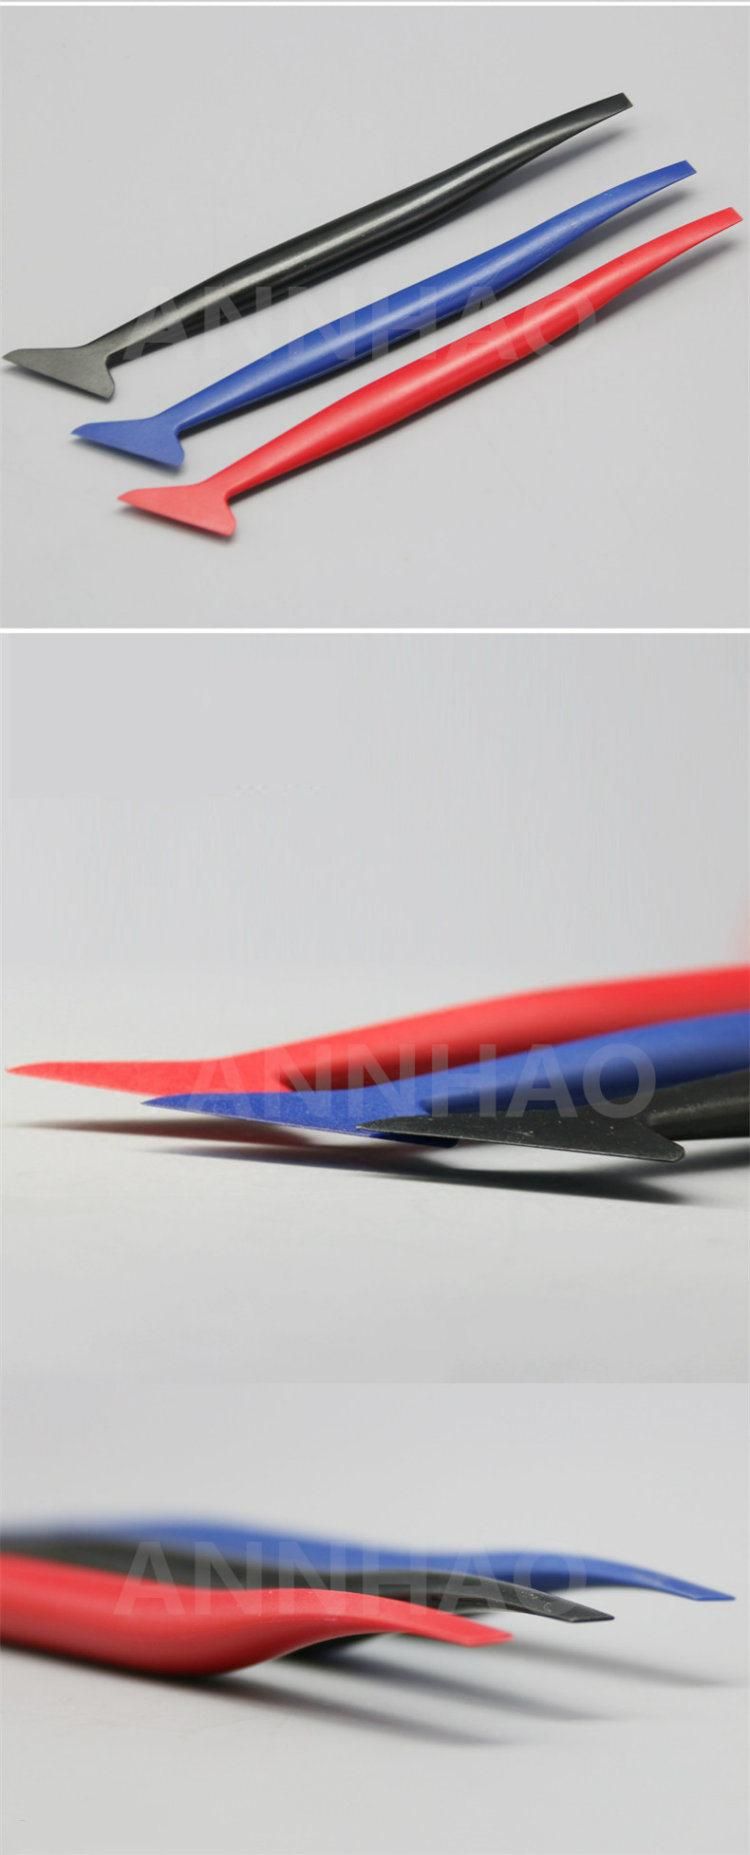 New Type TPU PVC ABS Material Car Edge Wrapping Graphic Tools